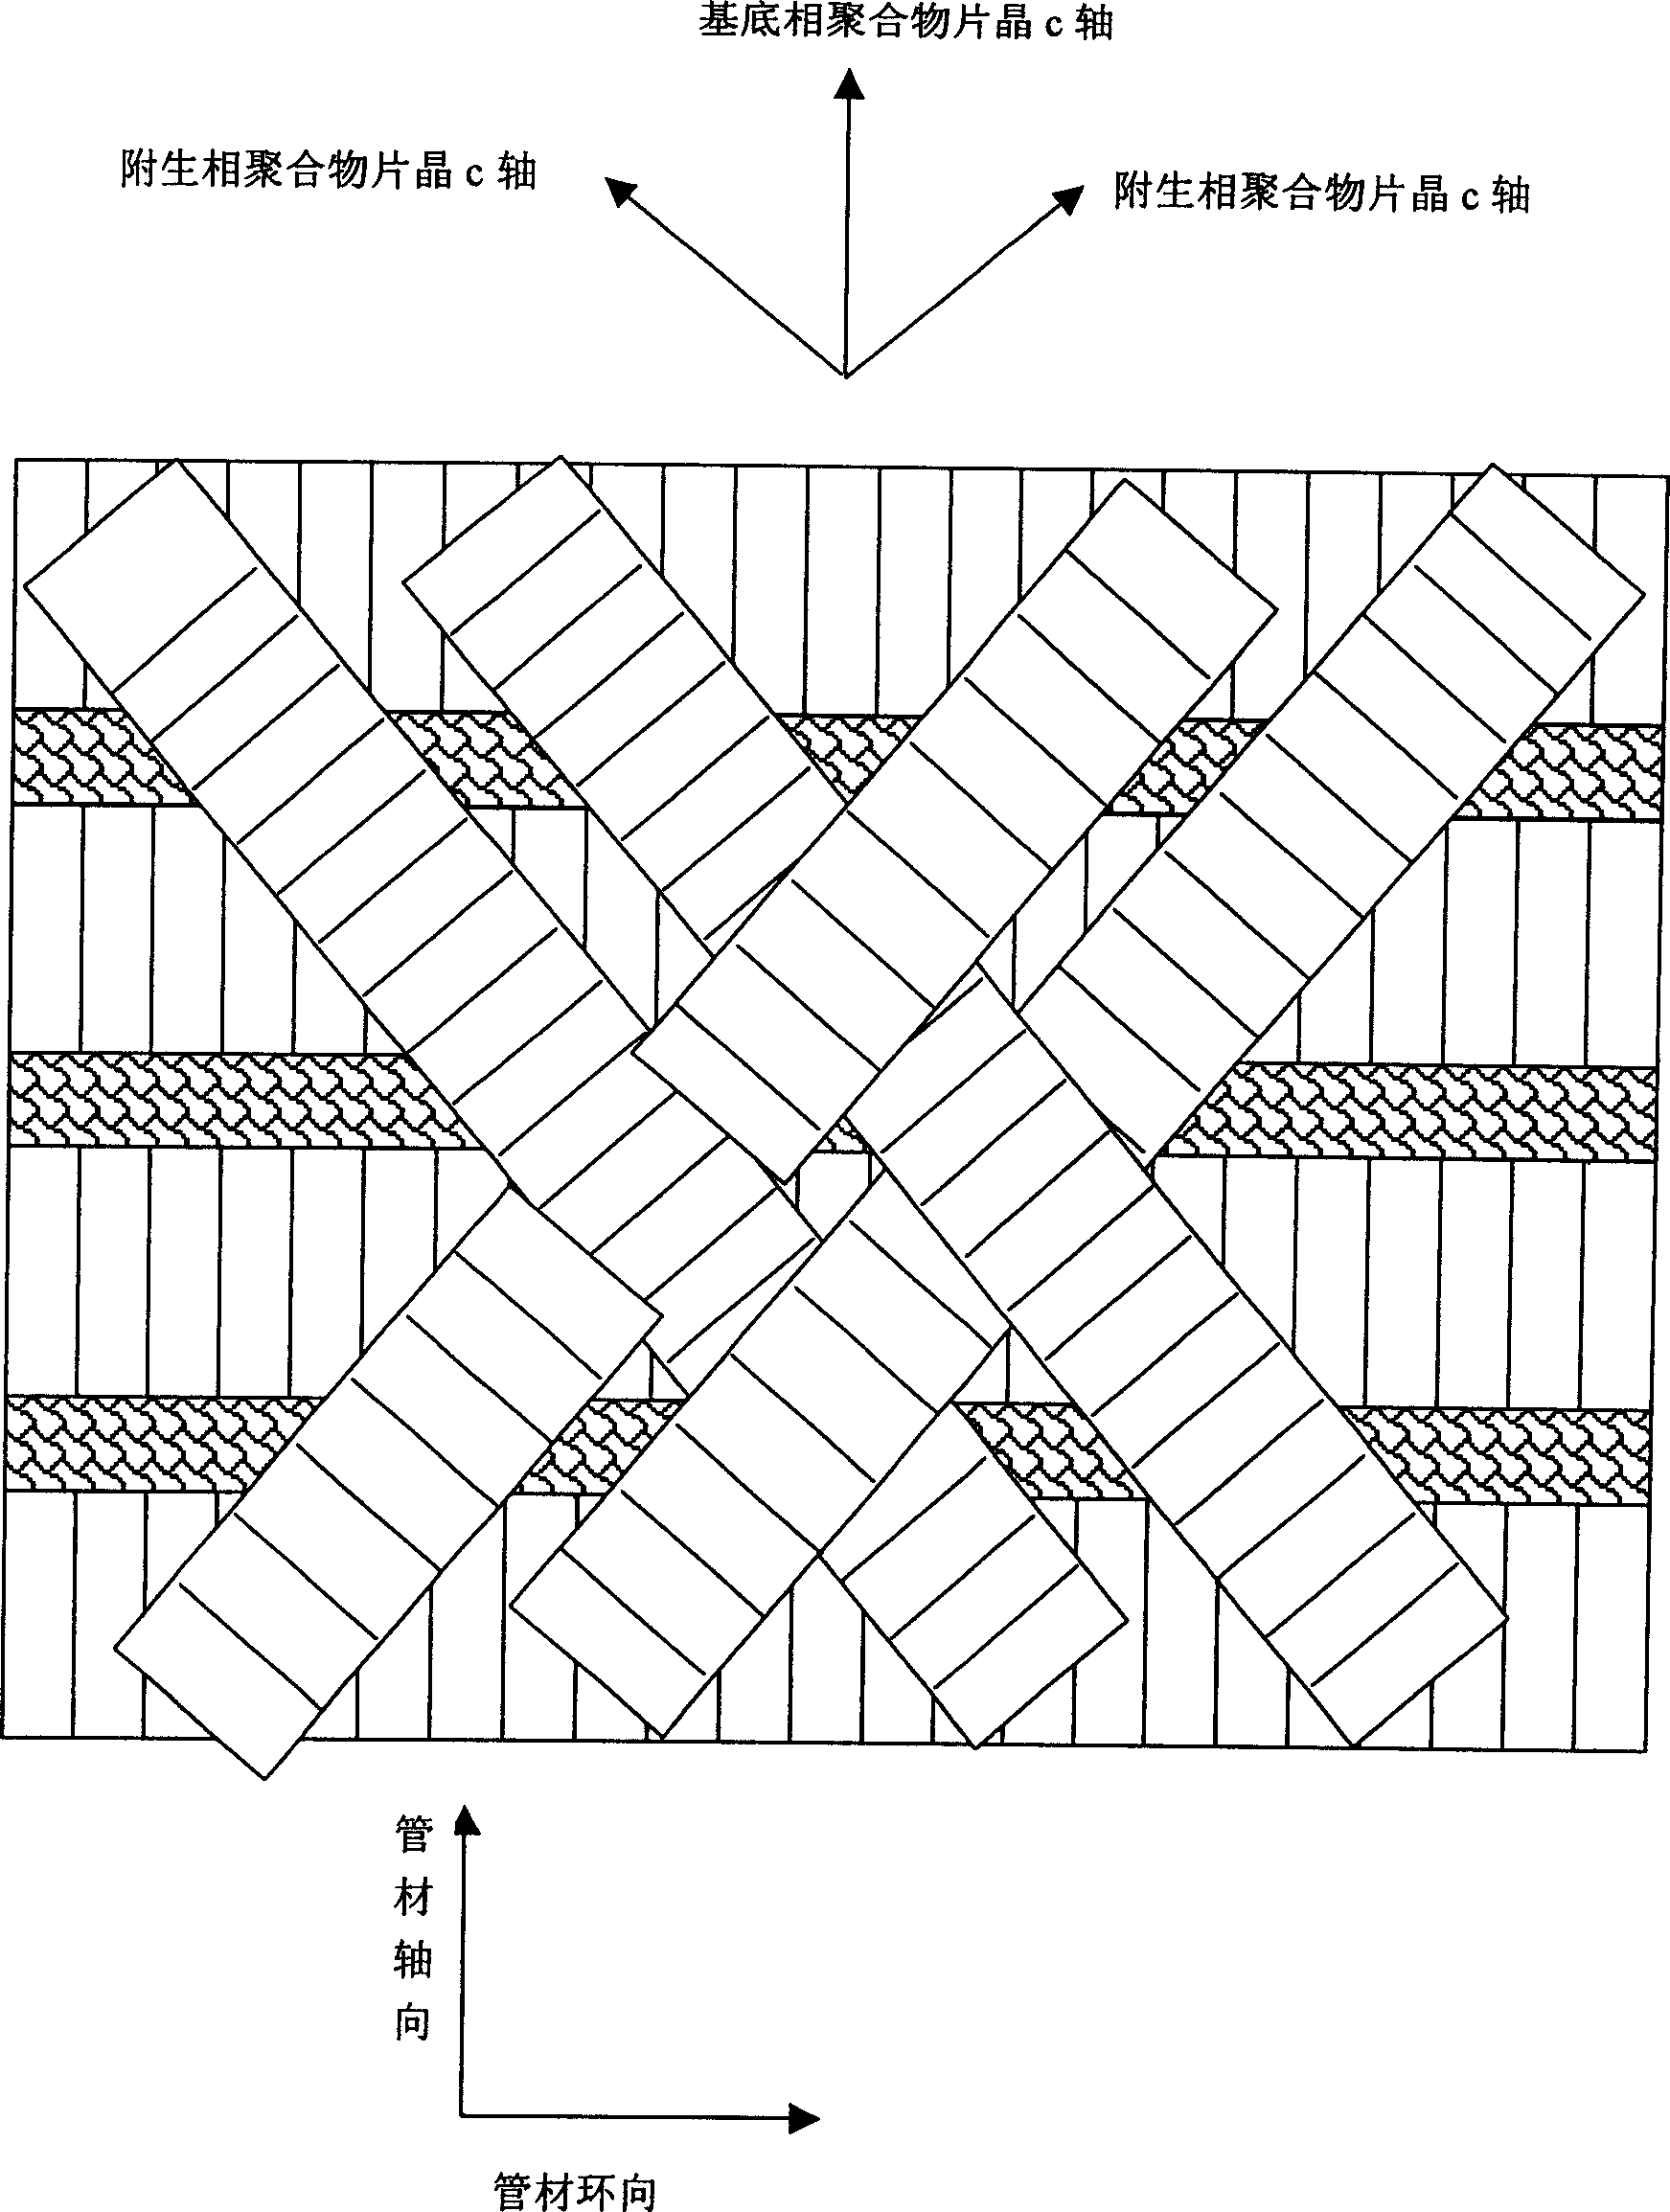 Multiplayer composite tube made from polymer possessing texture in nano layer and making method